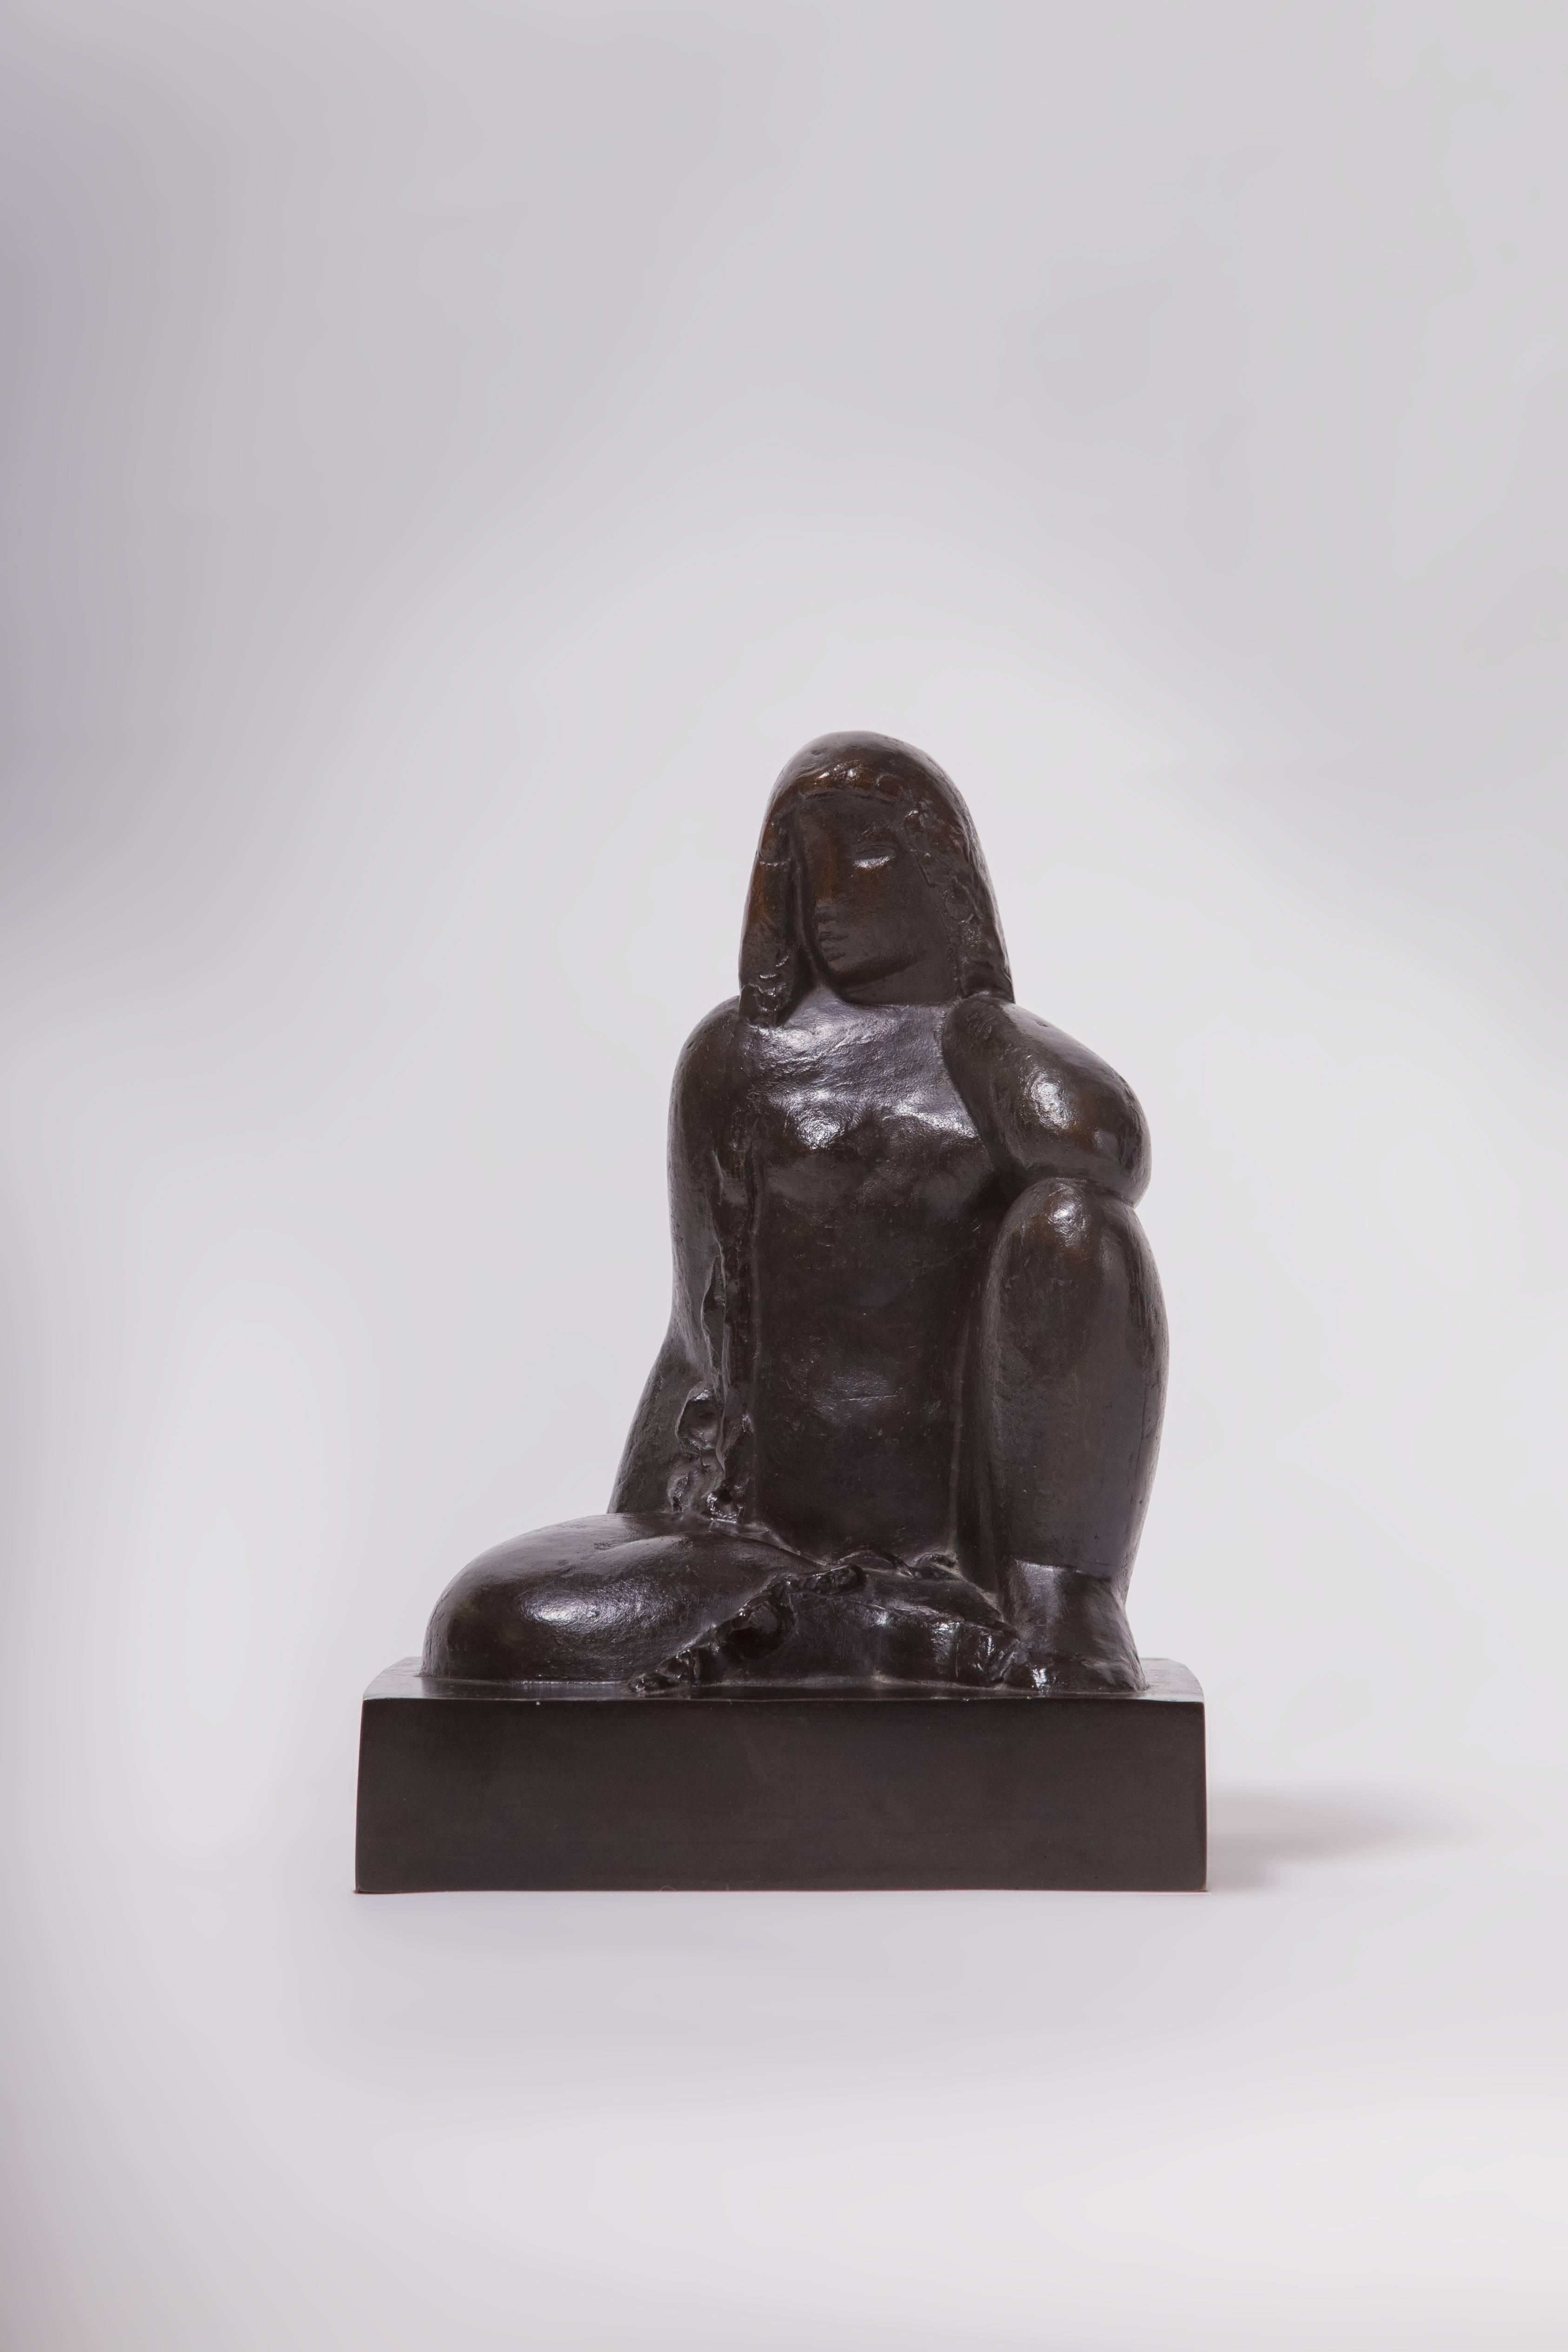 Sculpture in bronze with black patina
Signed and numbered 8/8. Stamped with the foundry stamp Blanchet and marked AC (Atelier Csaky)
The model from 1929, the present cast is a Postmodern edition from Blanchet foundry.